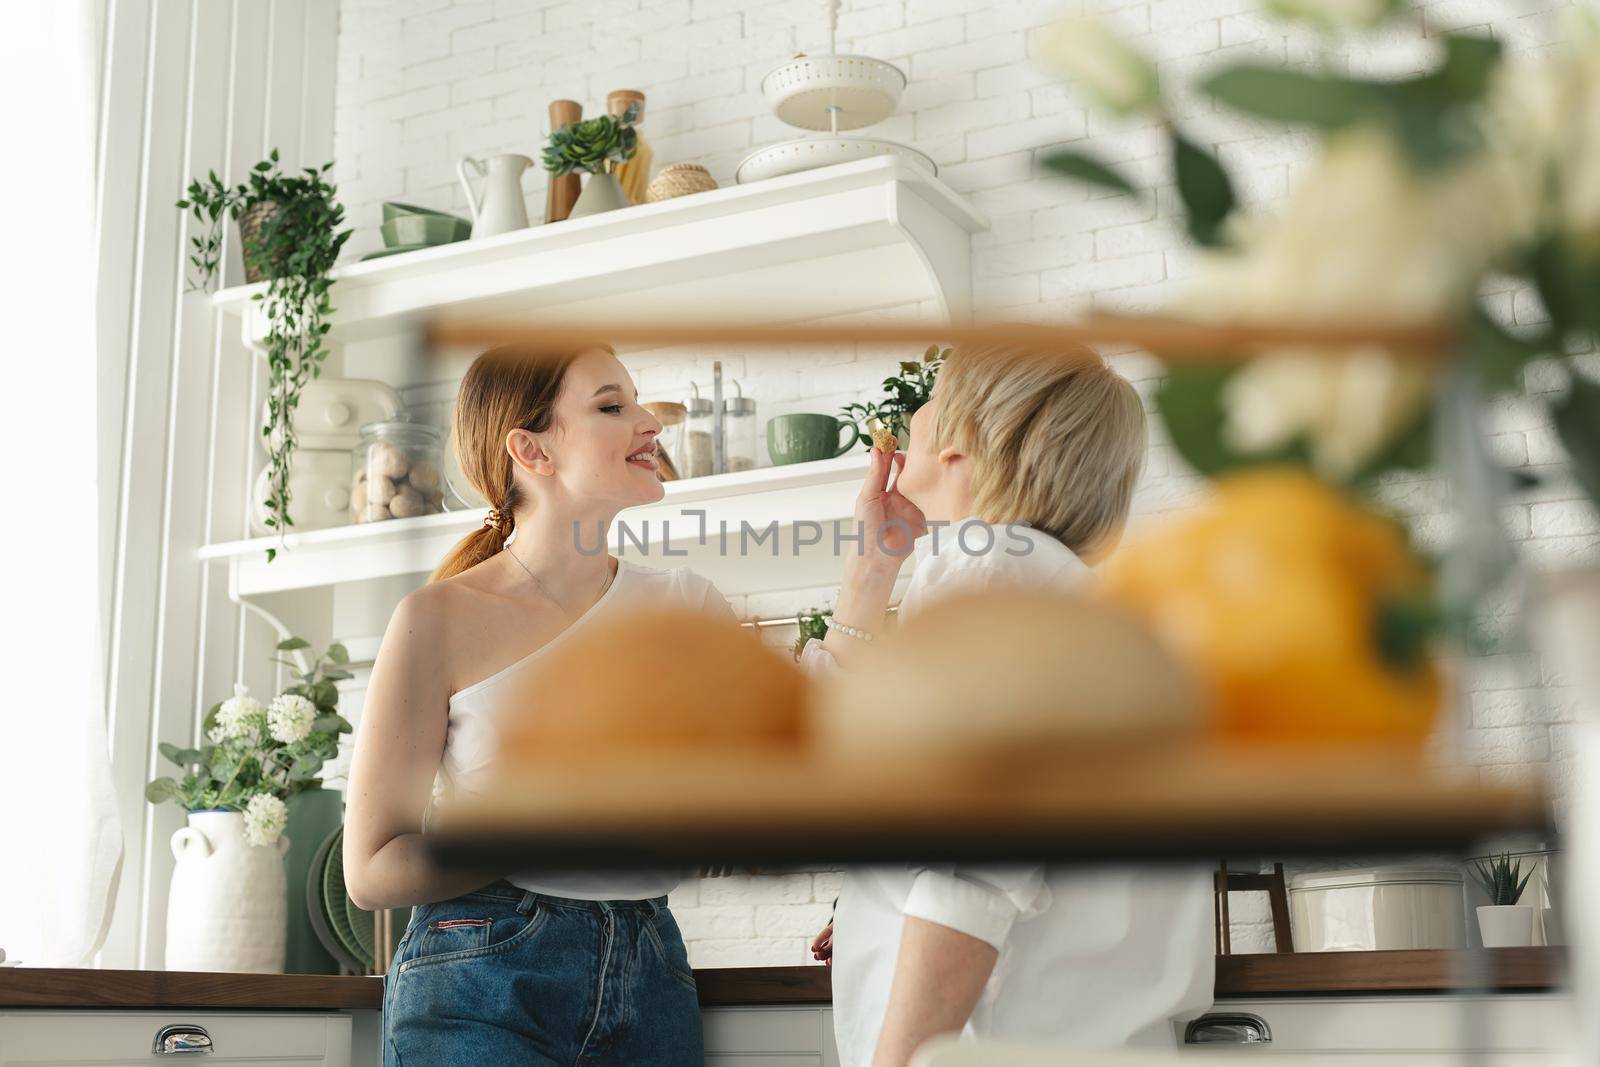 An adult daughter feeds her elderly mother fresh pastries in the kitchen by StudioPeace